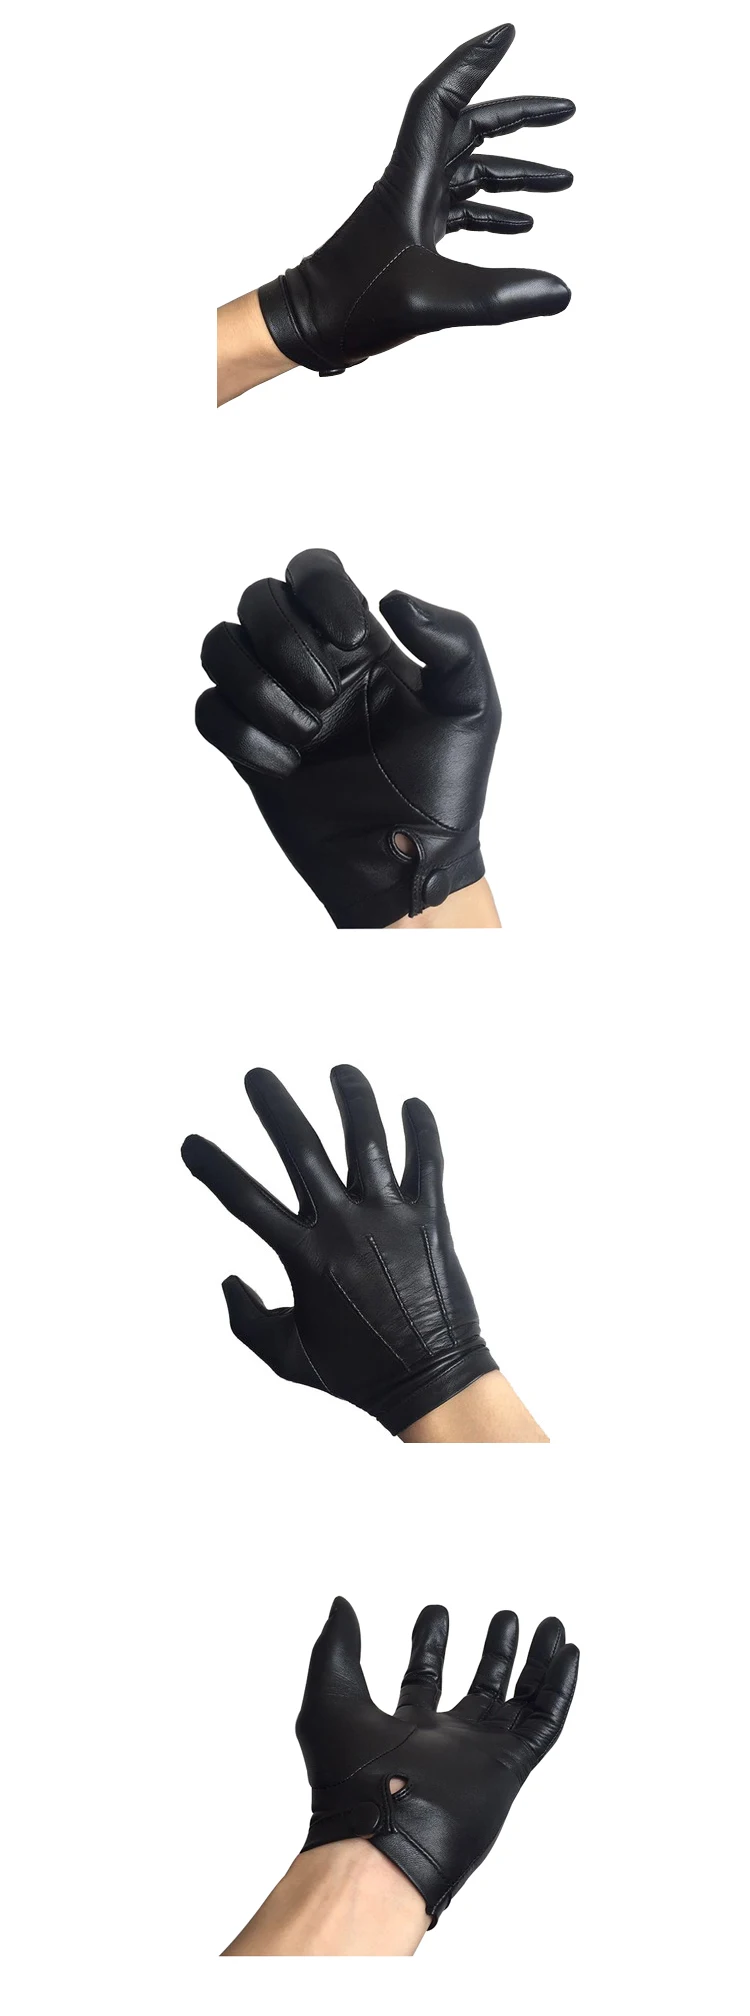 14HAO New Overlay Hanging Link Comfort Leather Gloves Decoration -170 Black 